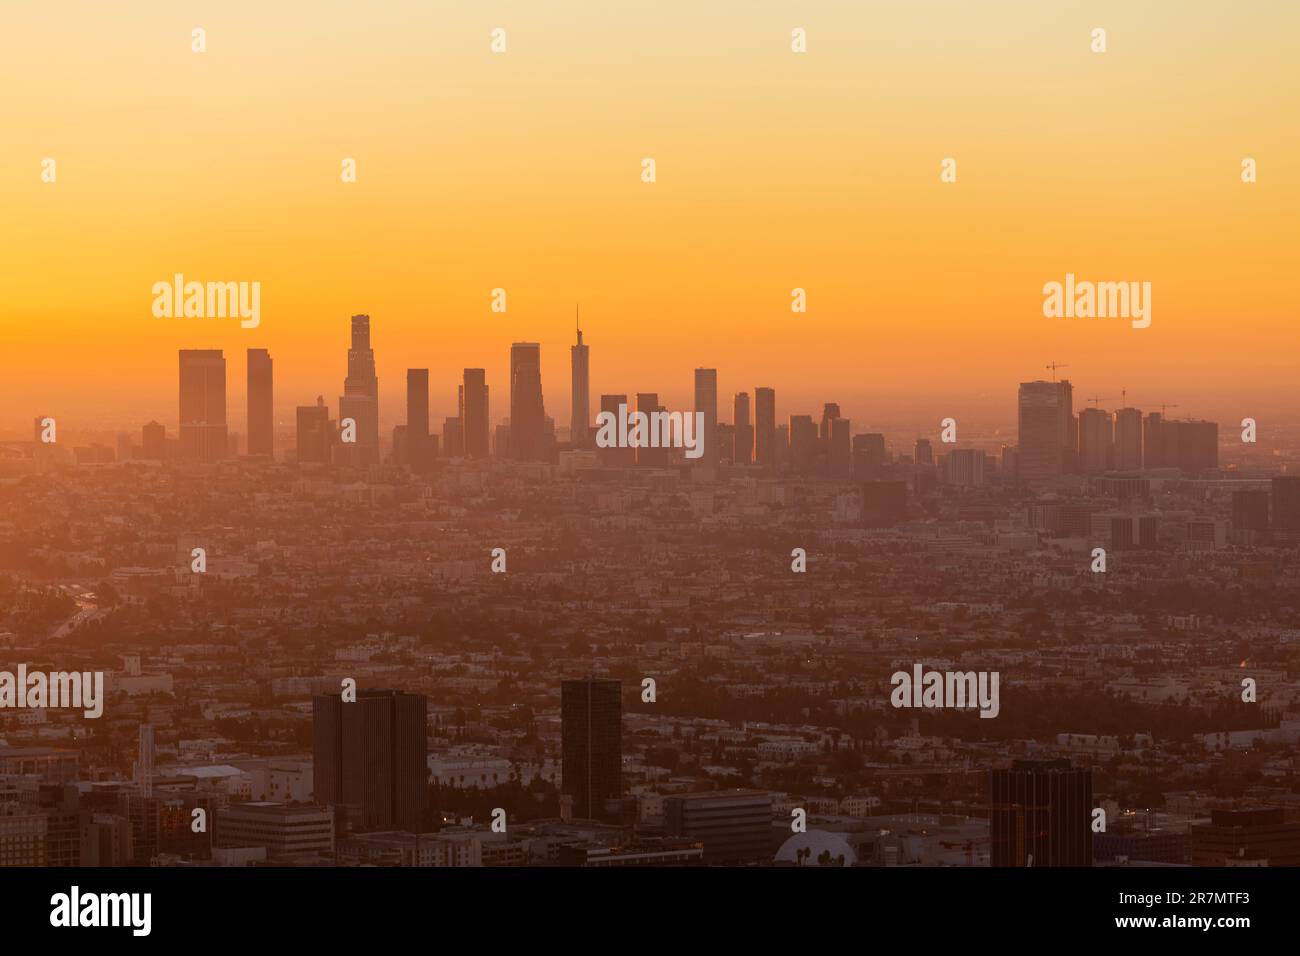 Smoggy orange sunrise cityscape view of Los Angeles and Hollywood from hilltop in the Santa Monica Mountains. Stock Photo